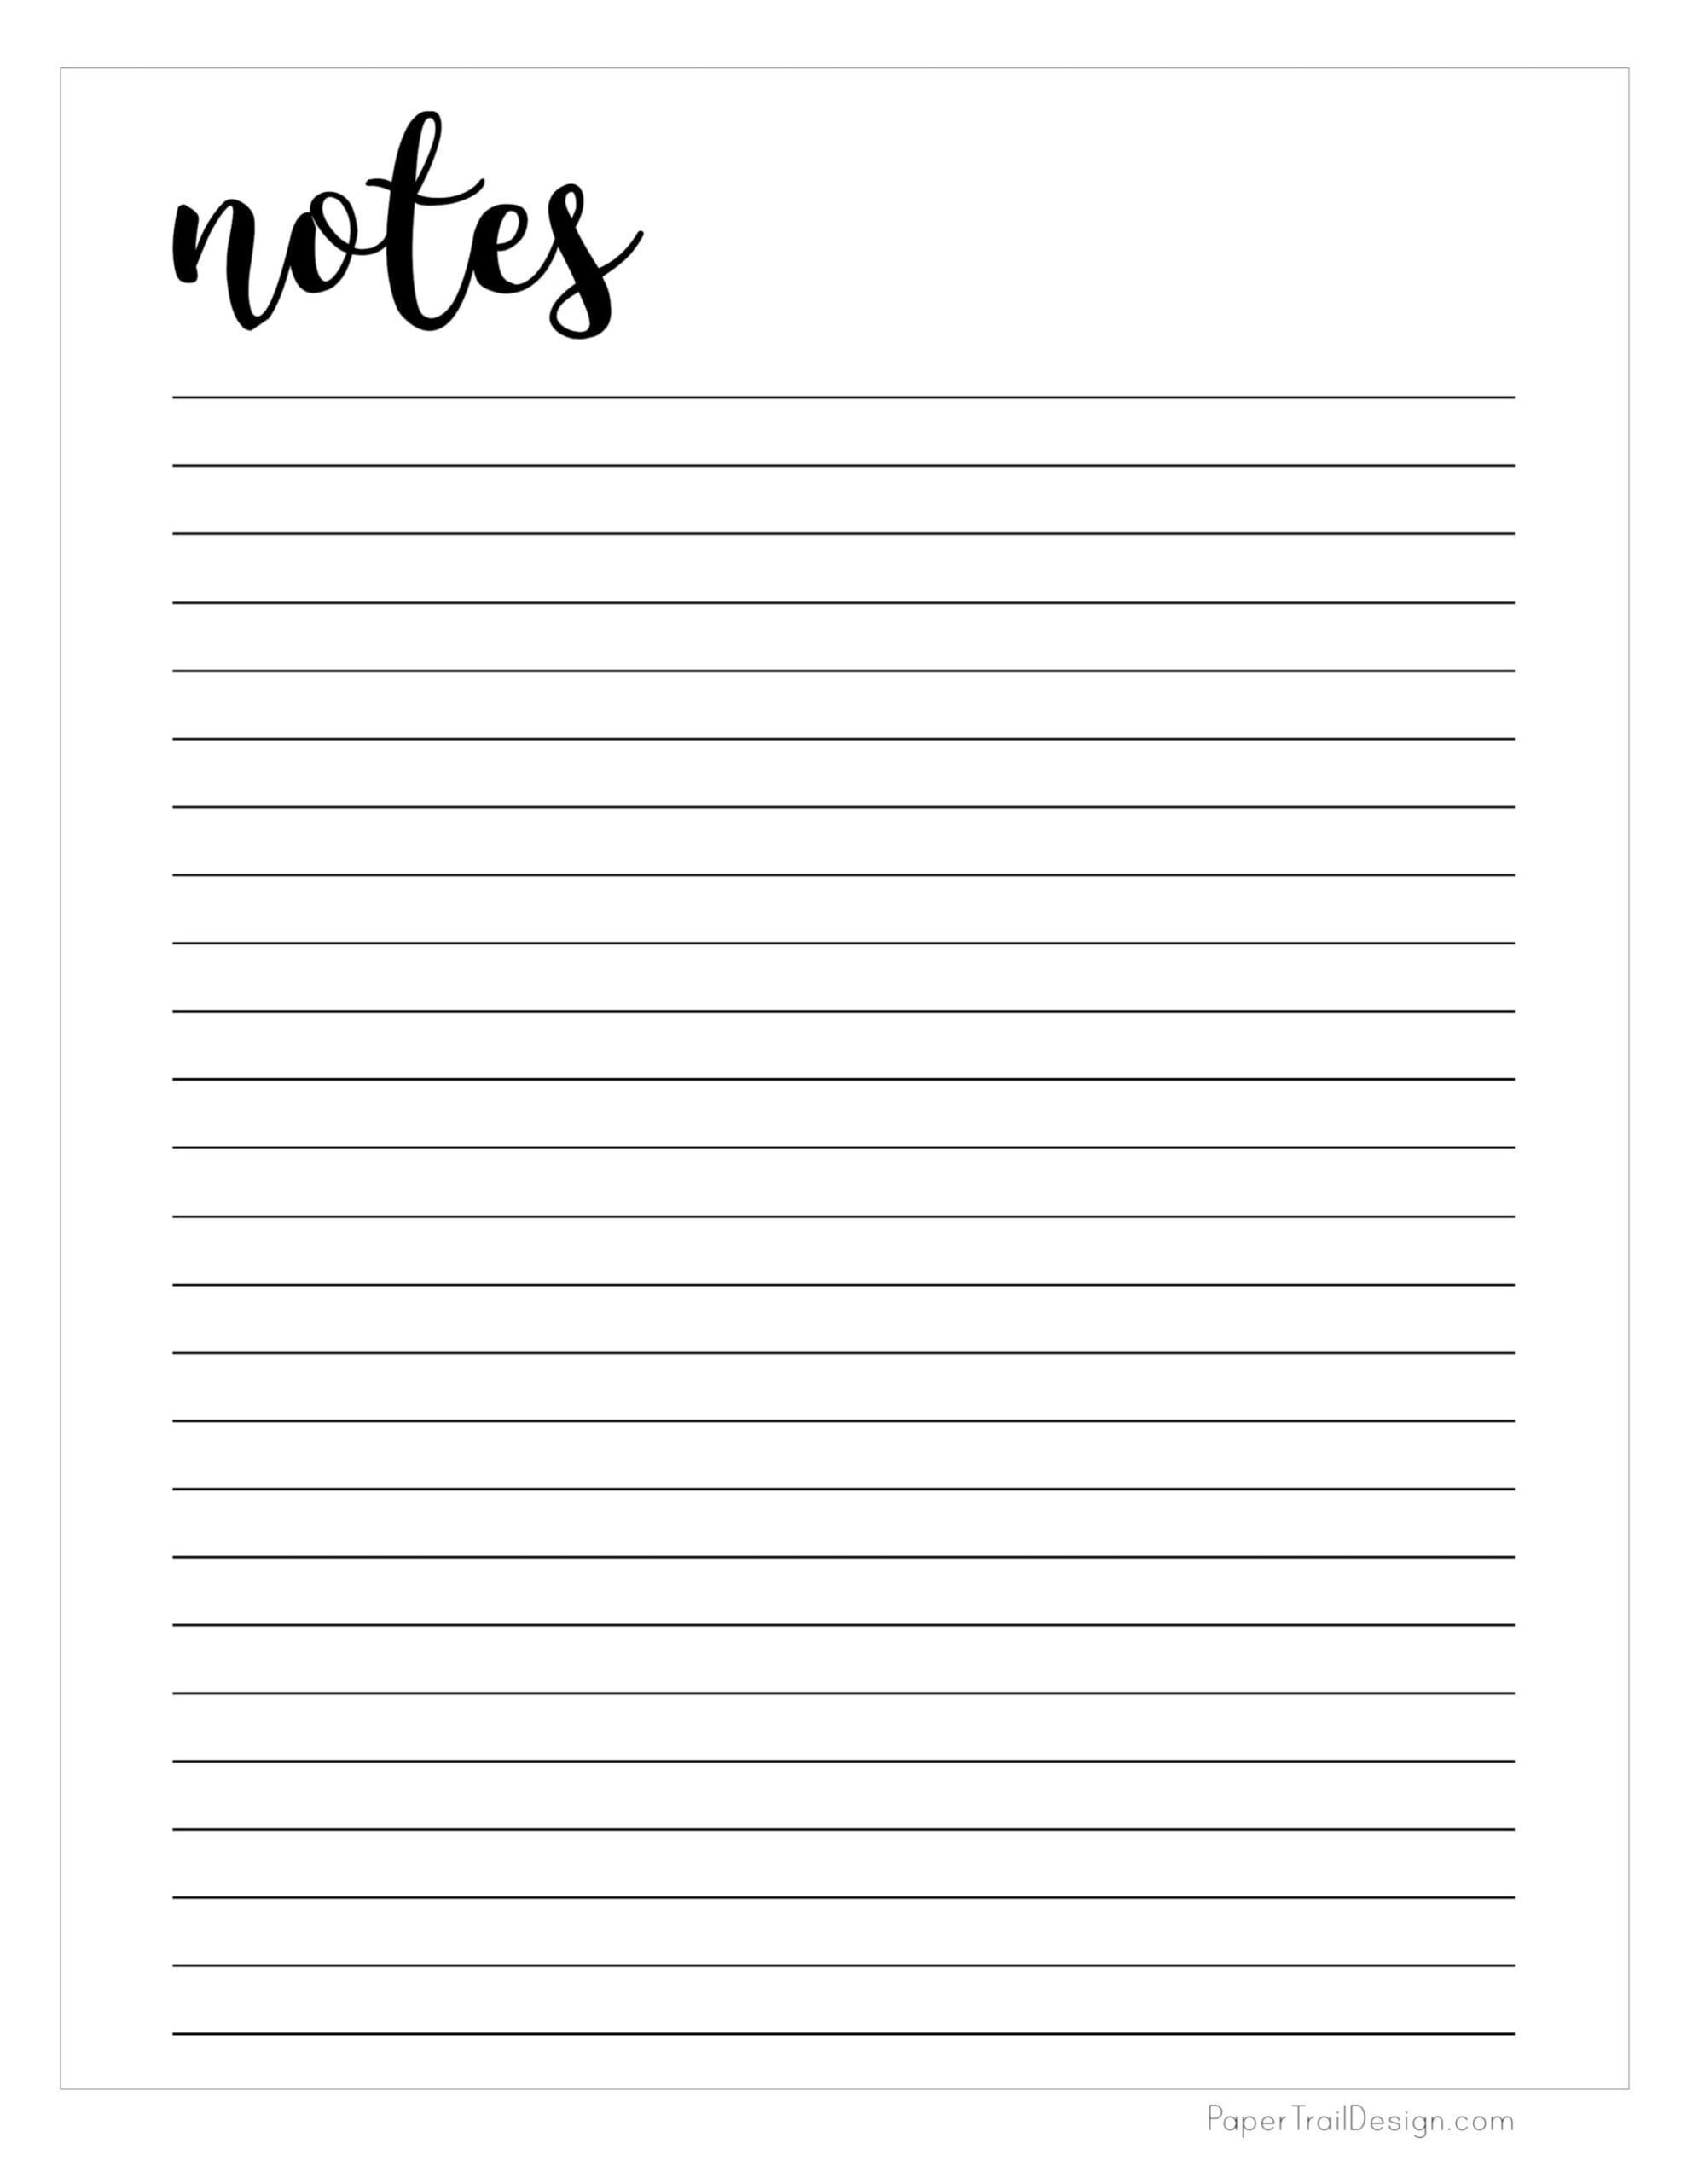 Free Printable Notes Template Paper Trail Design Printable Notes Templates Notes Template Paper Template Free Printable